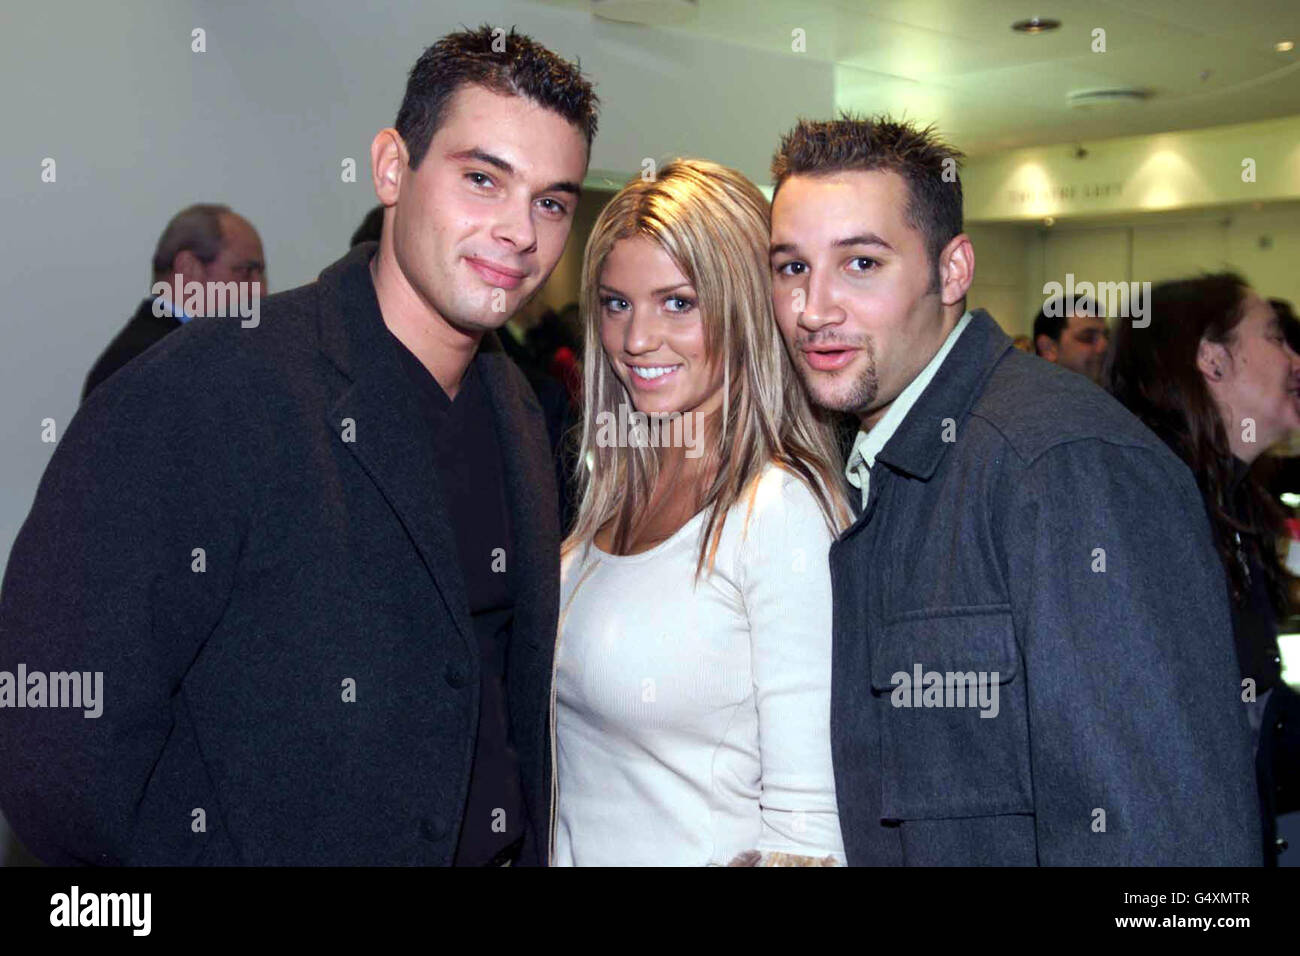 Model Jordan with Mark Baron (left) and Dane Bowers from pop group Another Level attend the launch of the Moet & Chandon London Restaurant Awards, at the Royal Opera House, London. Stock Photo